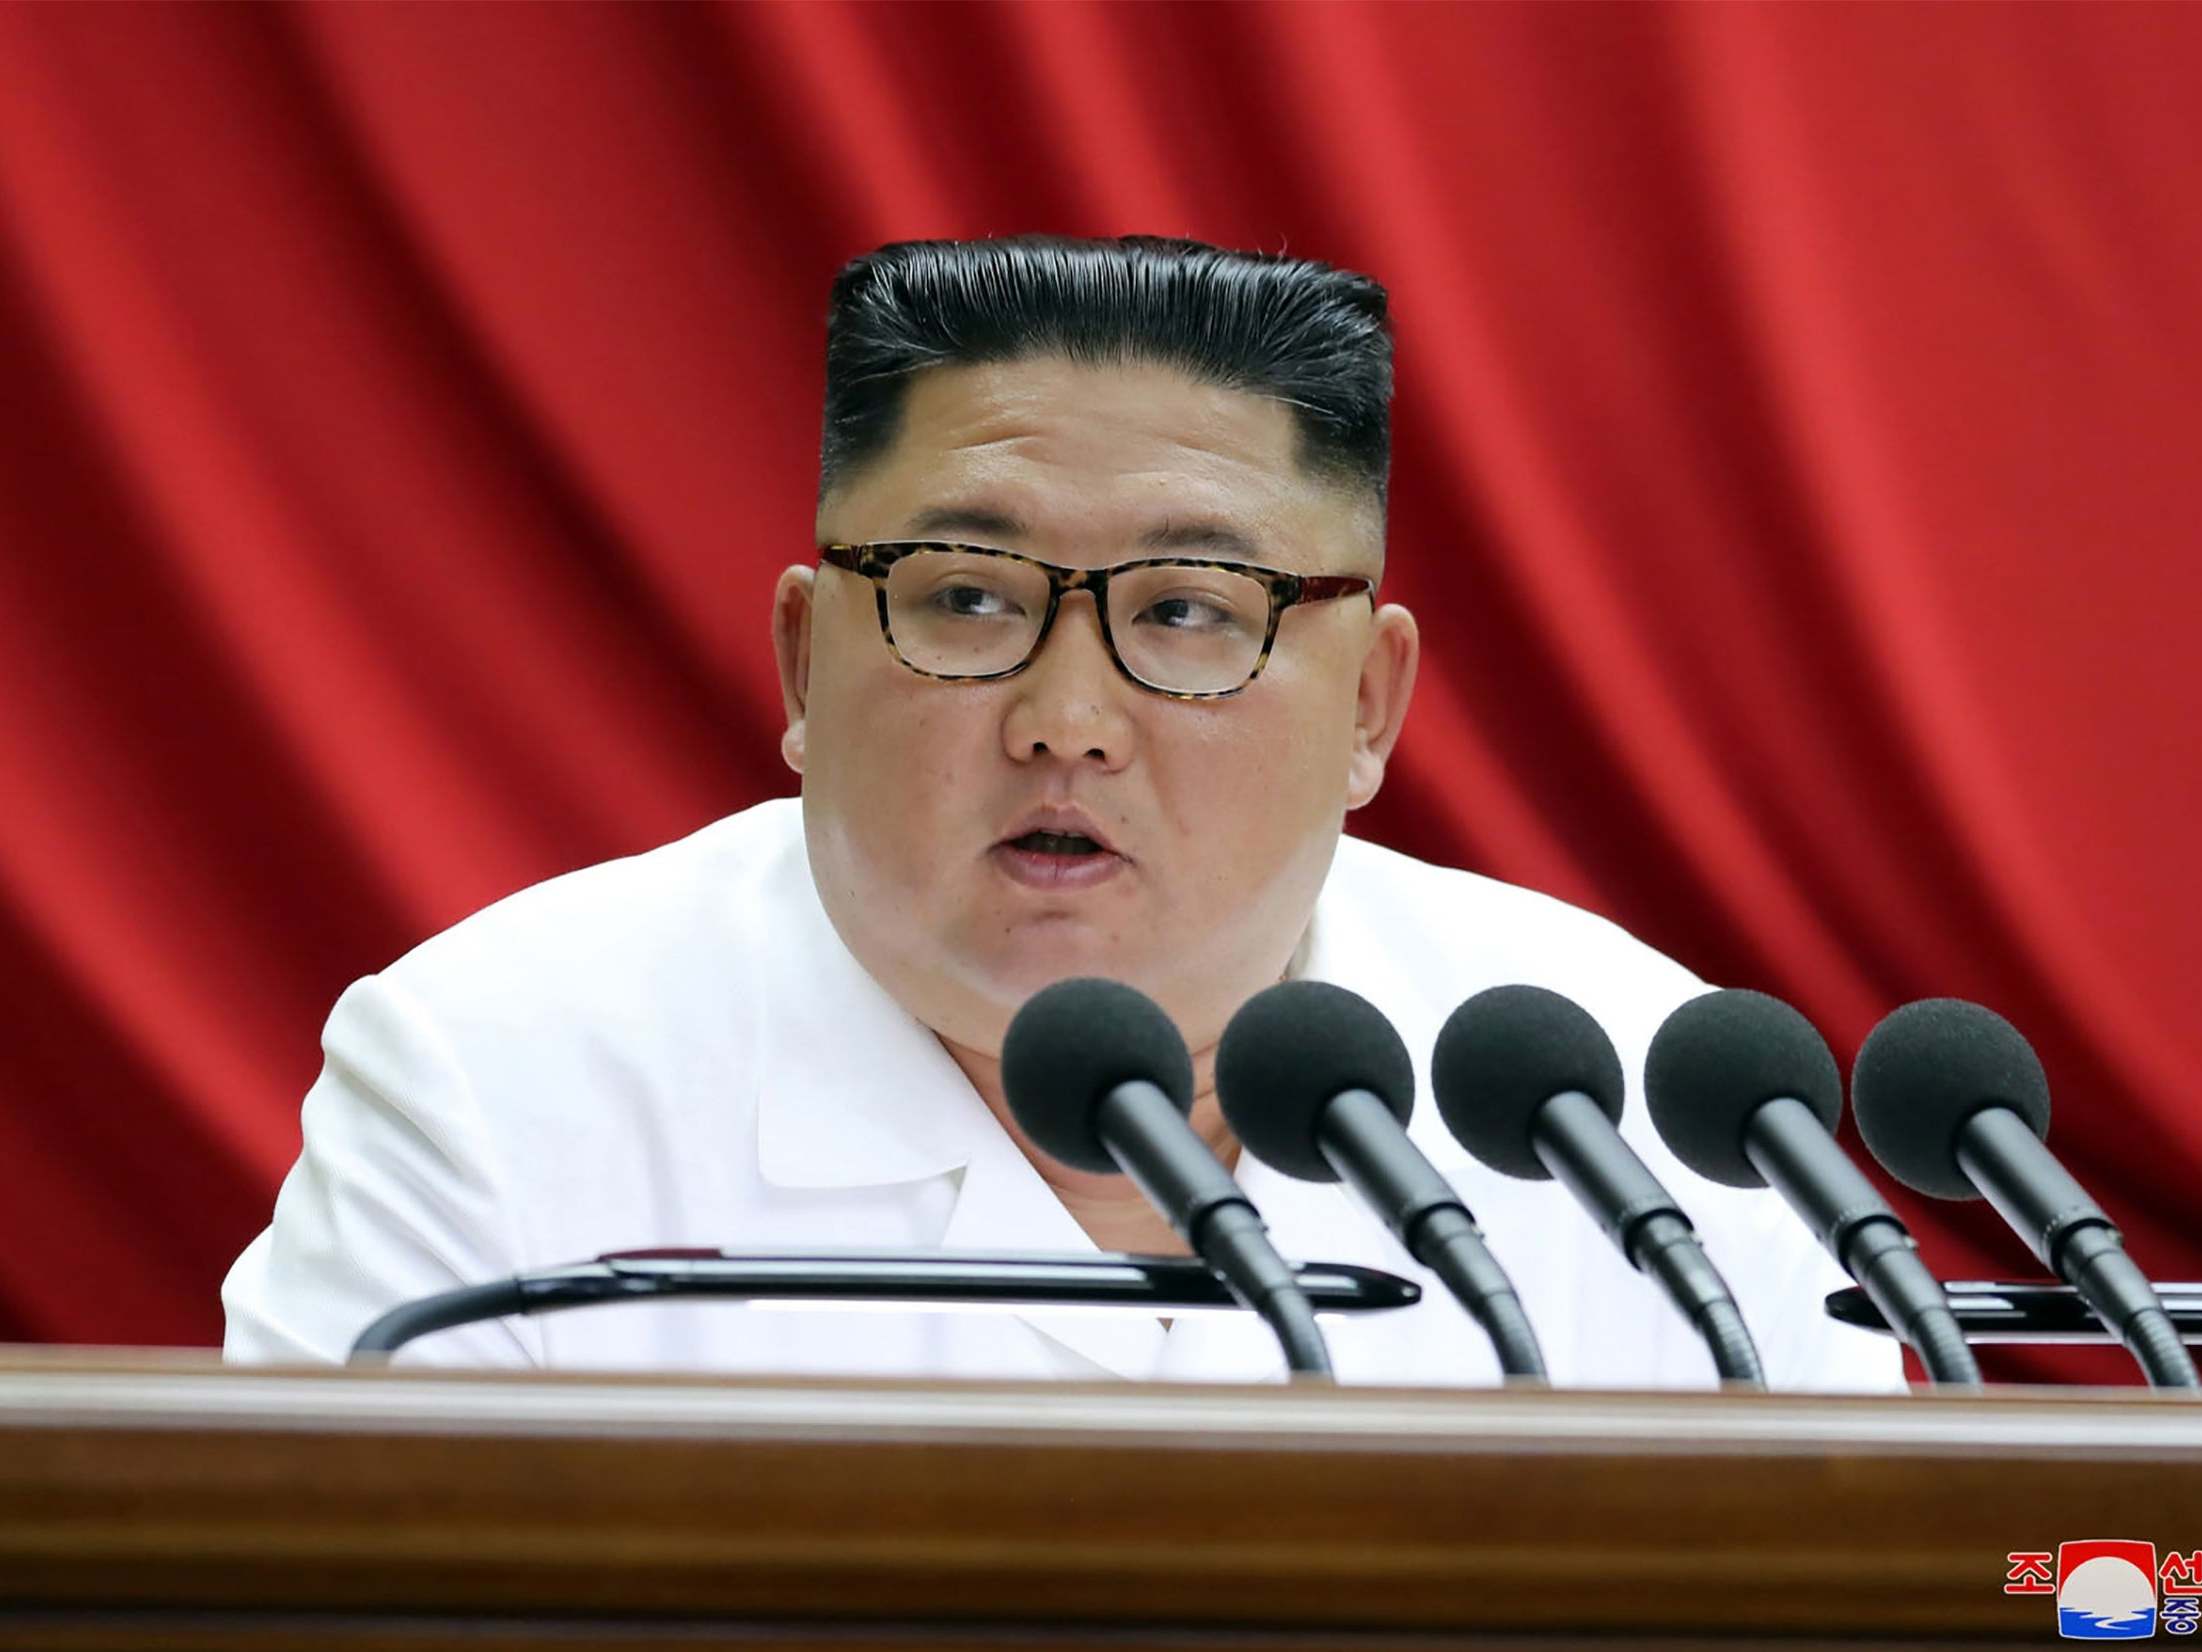 Kim Jong-Un attending the 7th Central Committee of the Workers' Party of Korea in the lead-up to his New Year speech